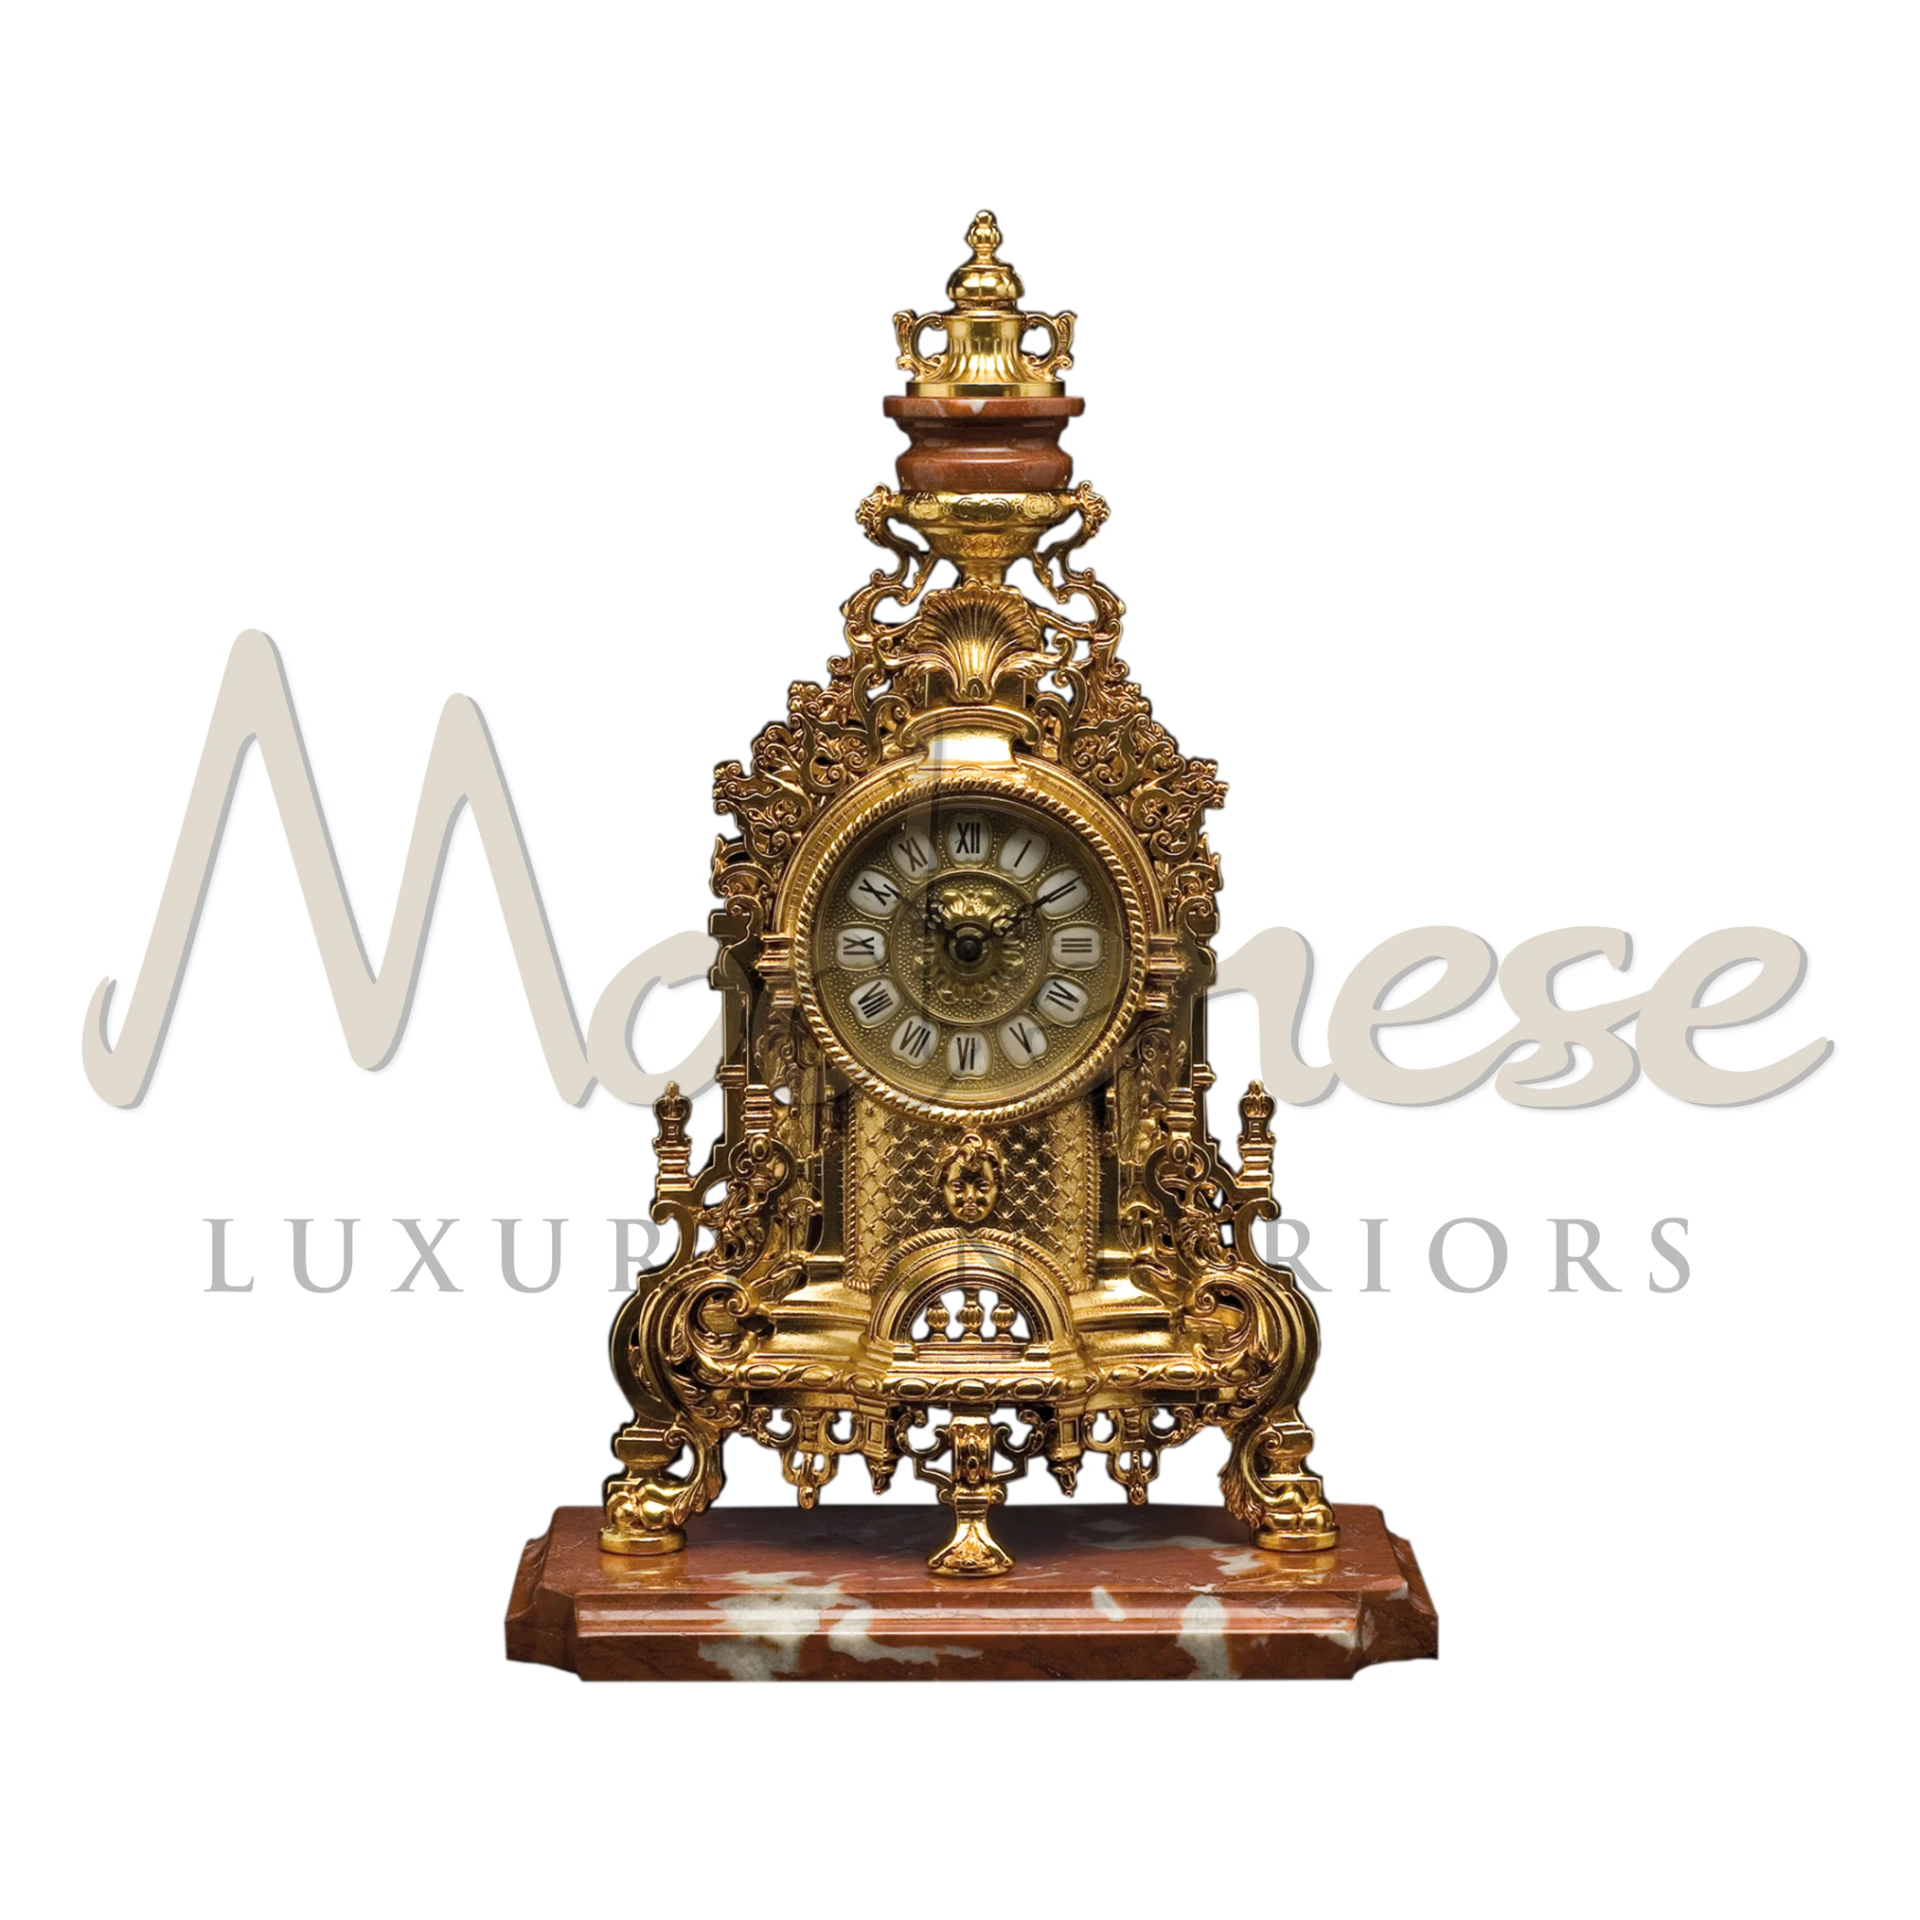 Luxurious Italian Elite Clock with Rosso Francia marble base for elegant home decor
